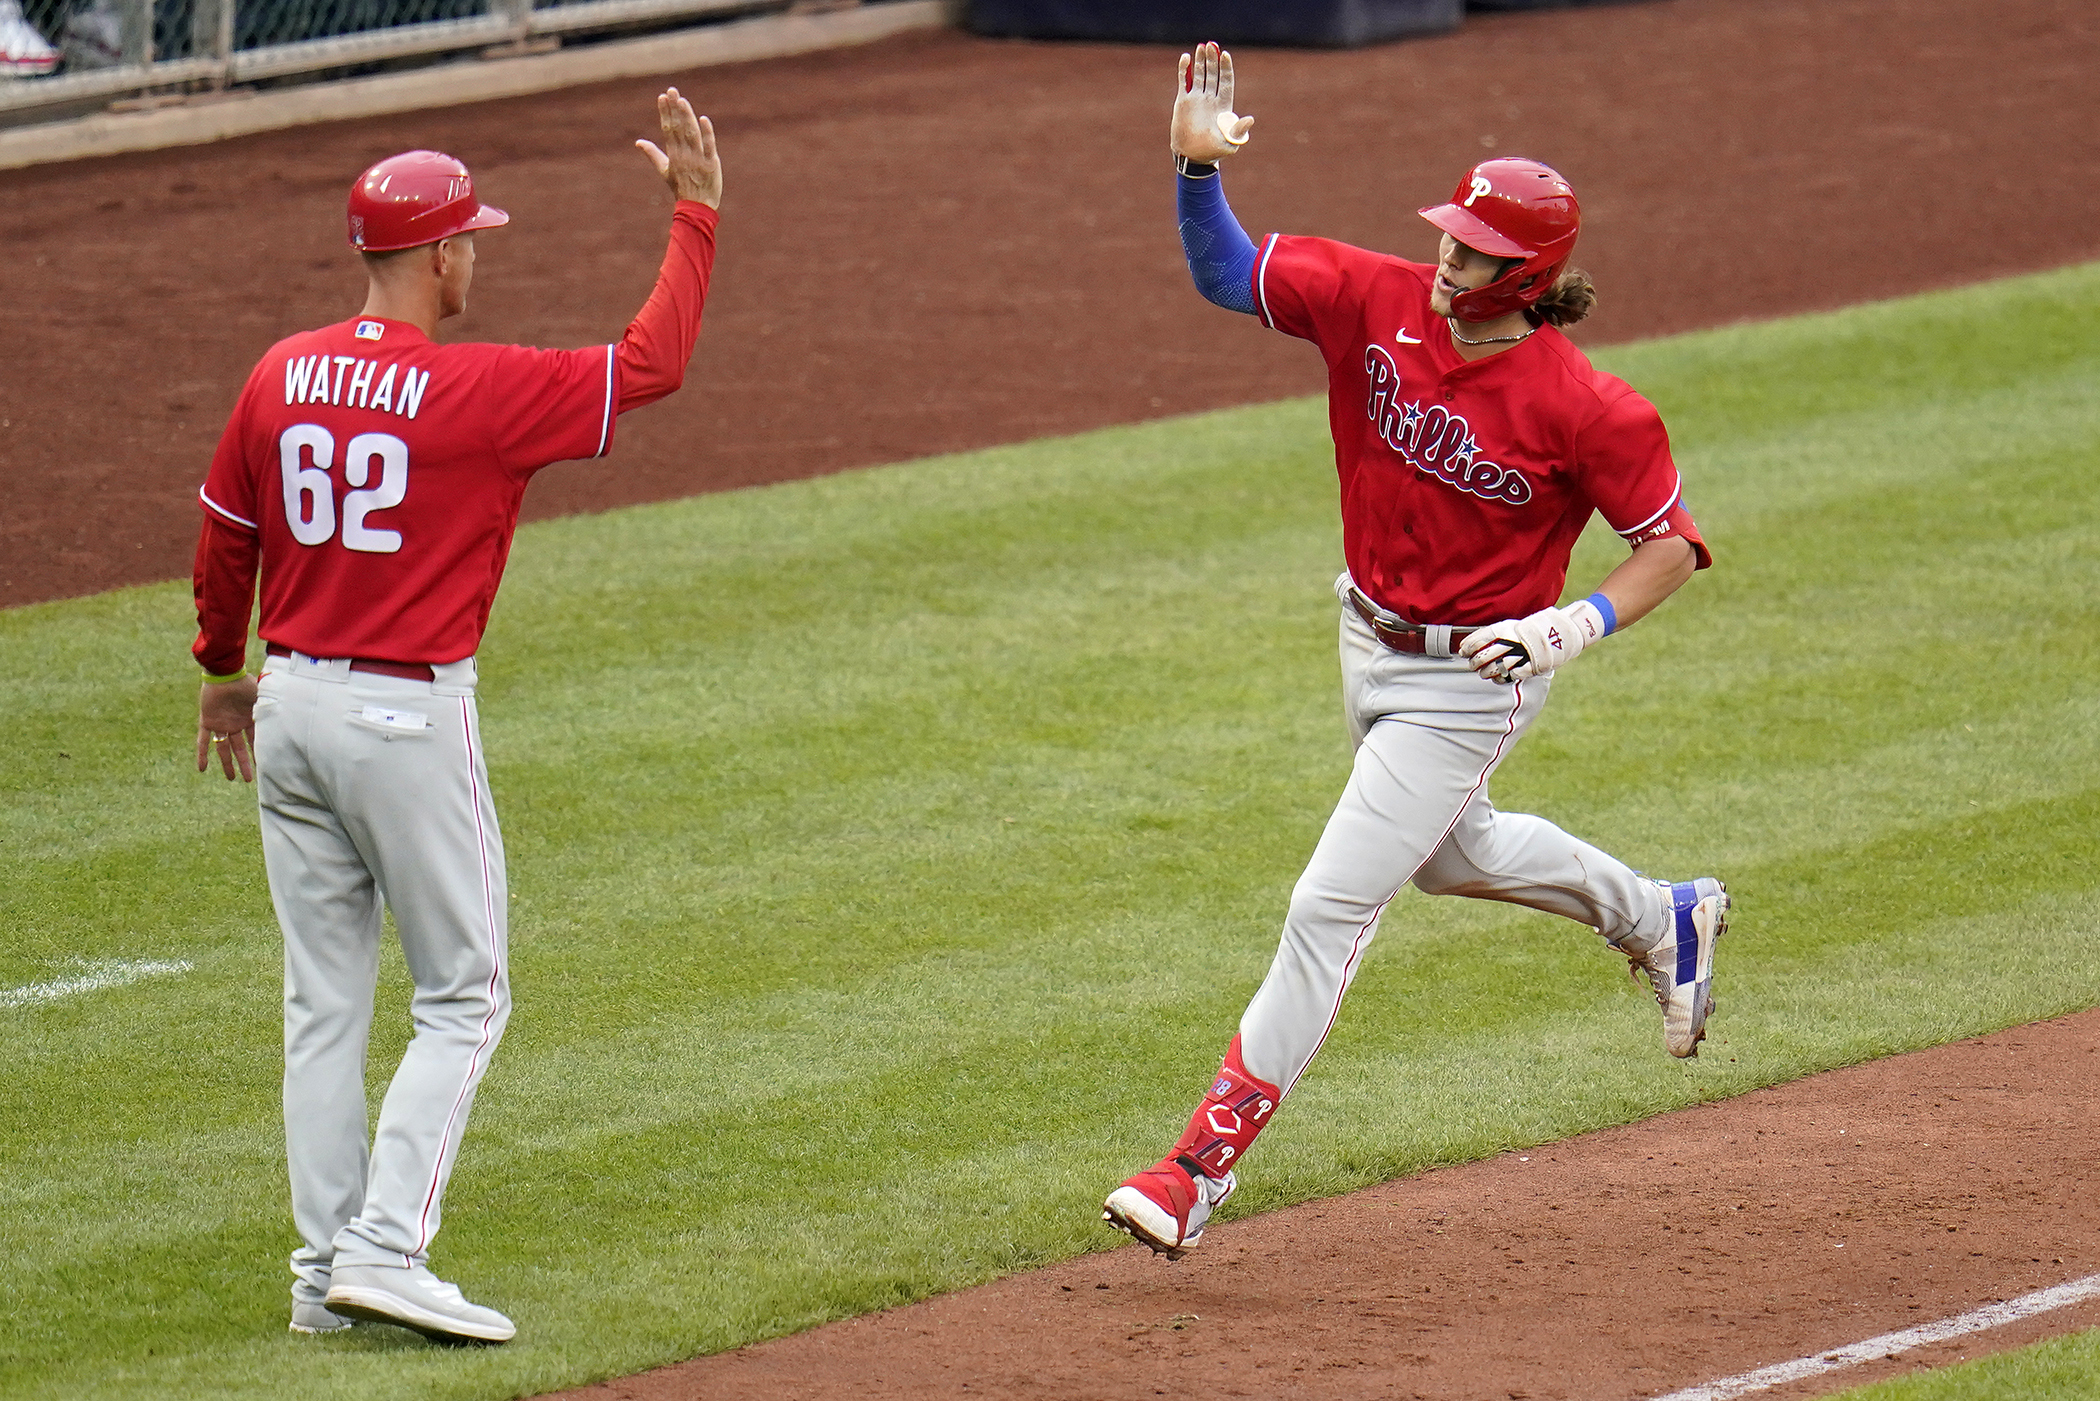 Phillies uniforms ranked fourth best in MLB  Phillies Nation - Your source  for Philadelphia Phillies news, opinion, history, rumors, events, and other  fun stuff.